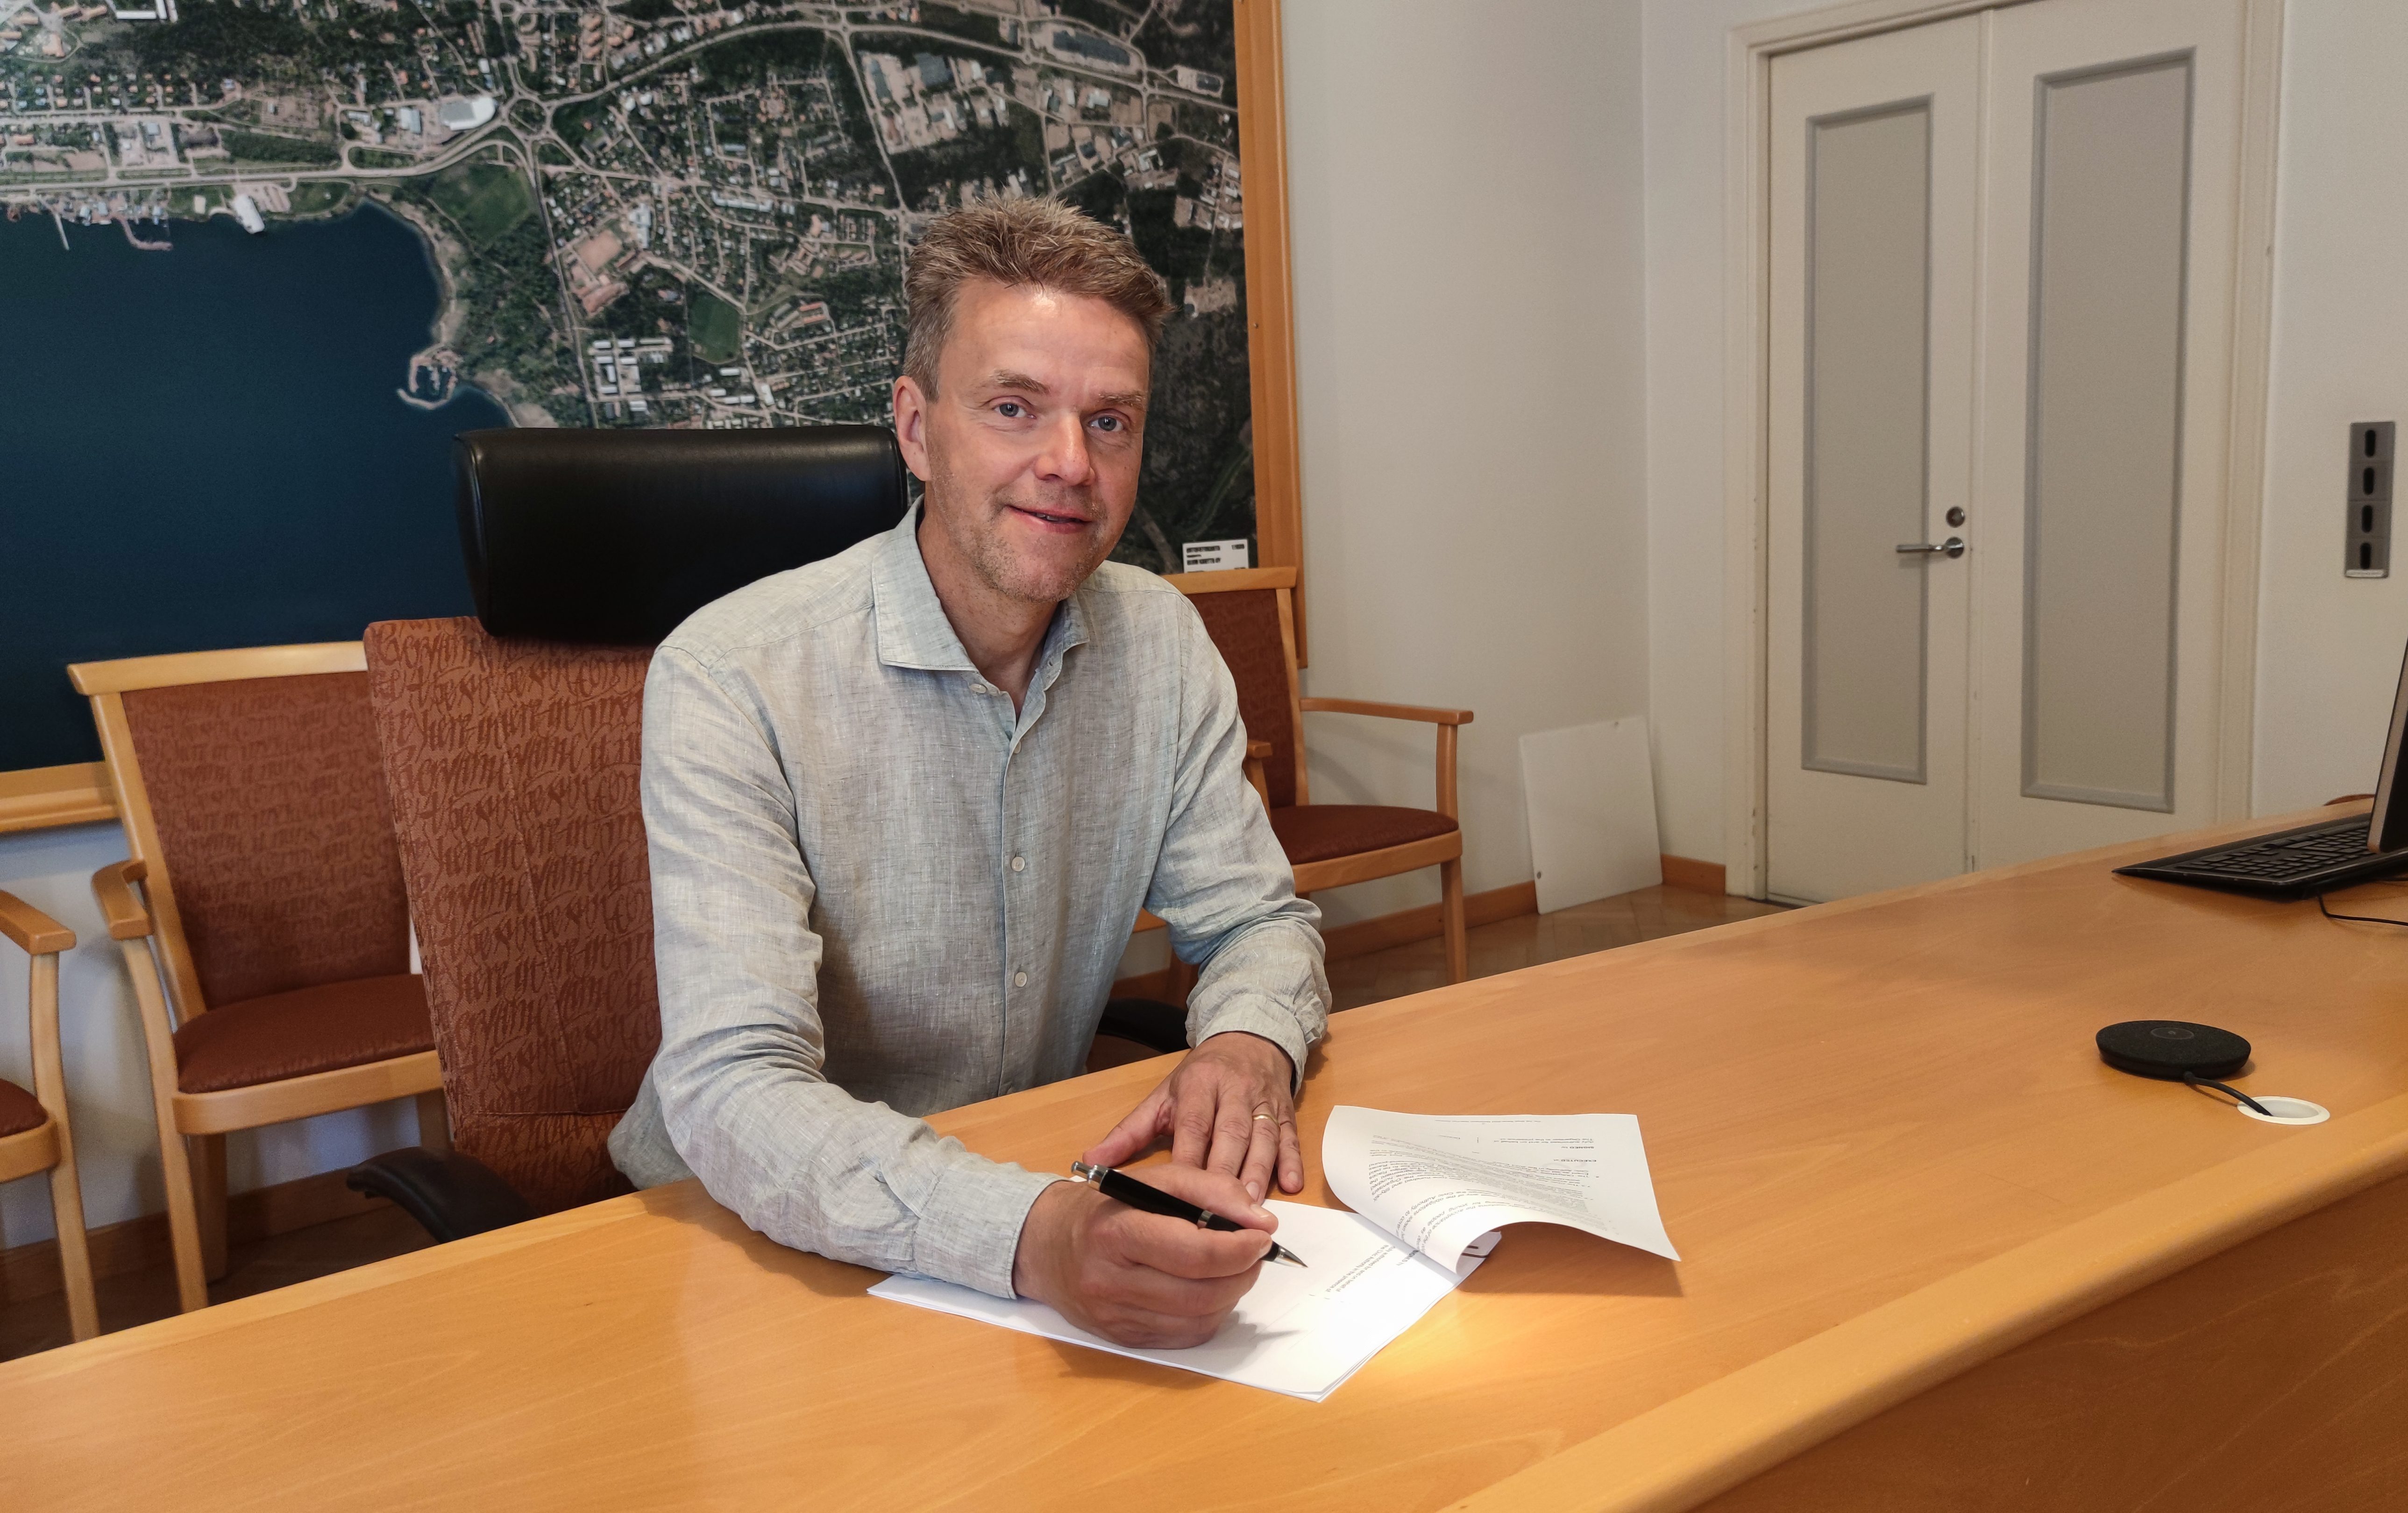 Arne signing the contract